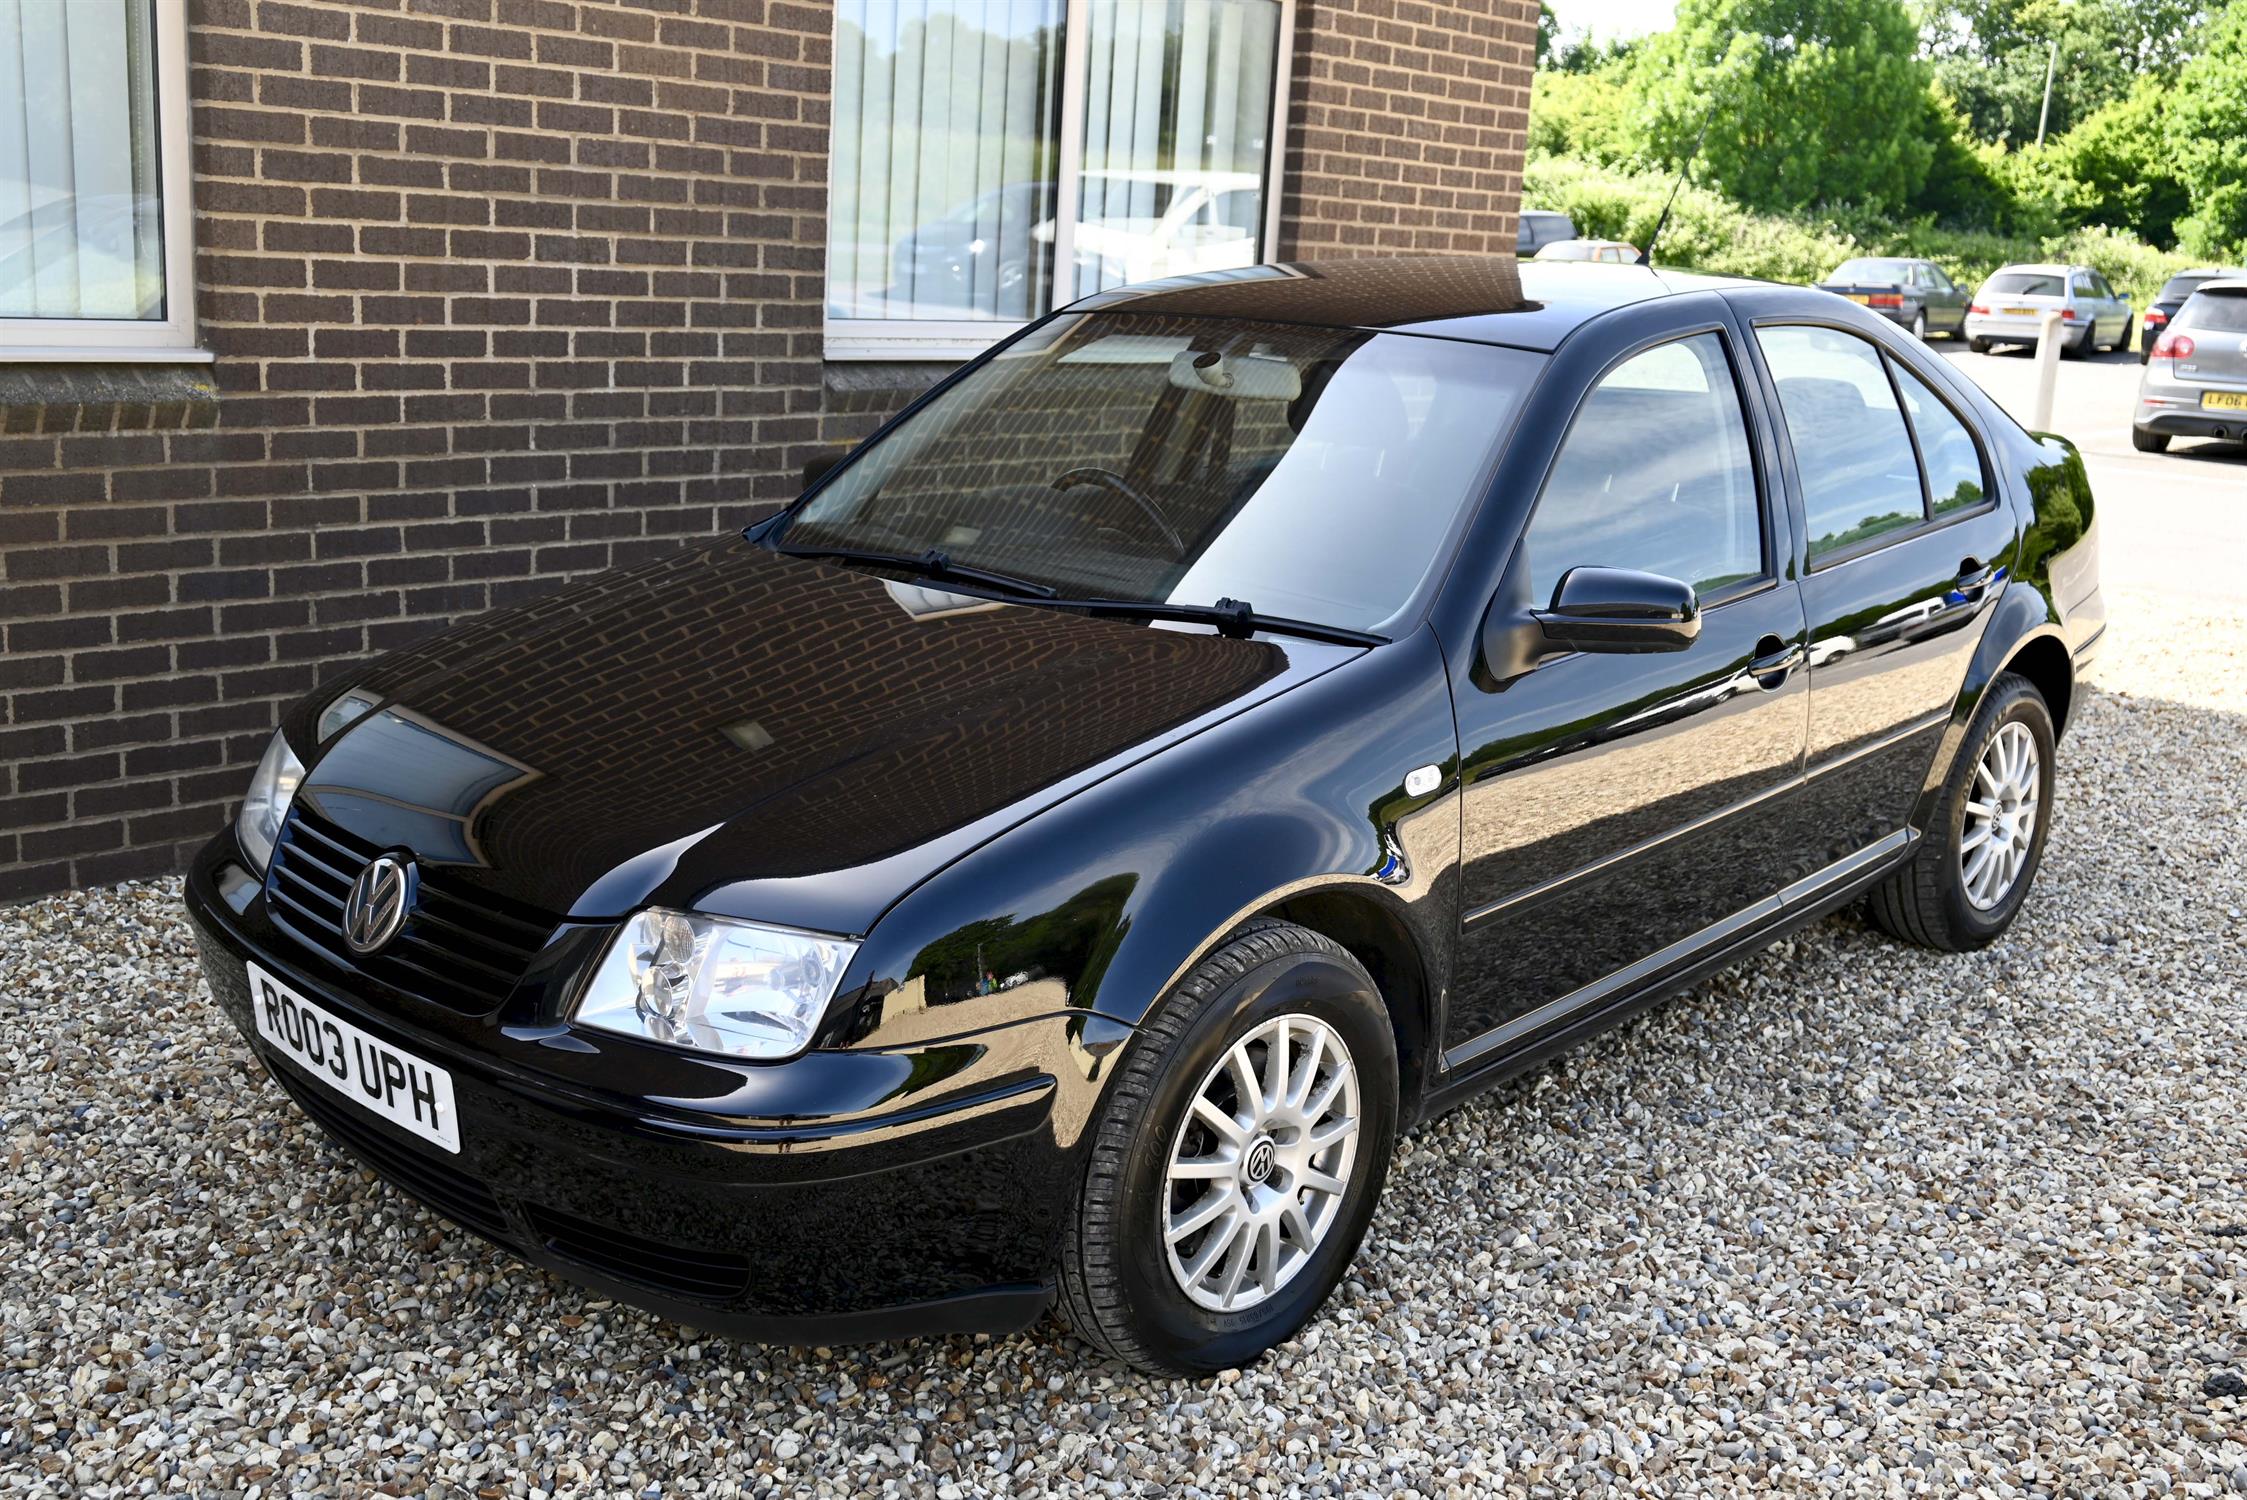 2003 (Mk 4) VW Bora ST 1.8T Black coachwork with charcoal cloth upholstery. 5-speed manual, - Image 8 of 16